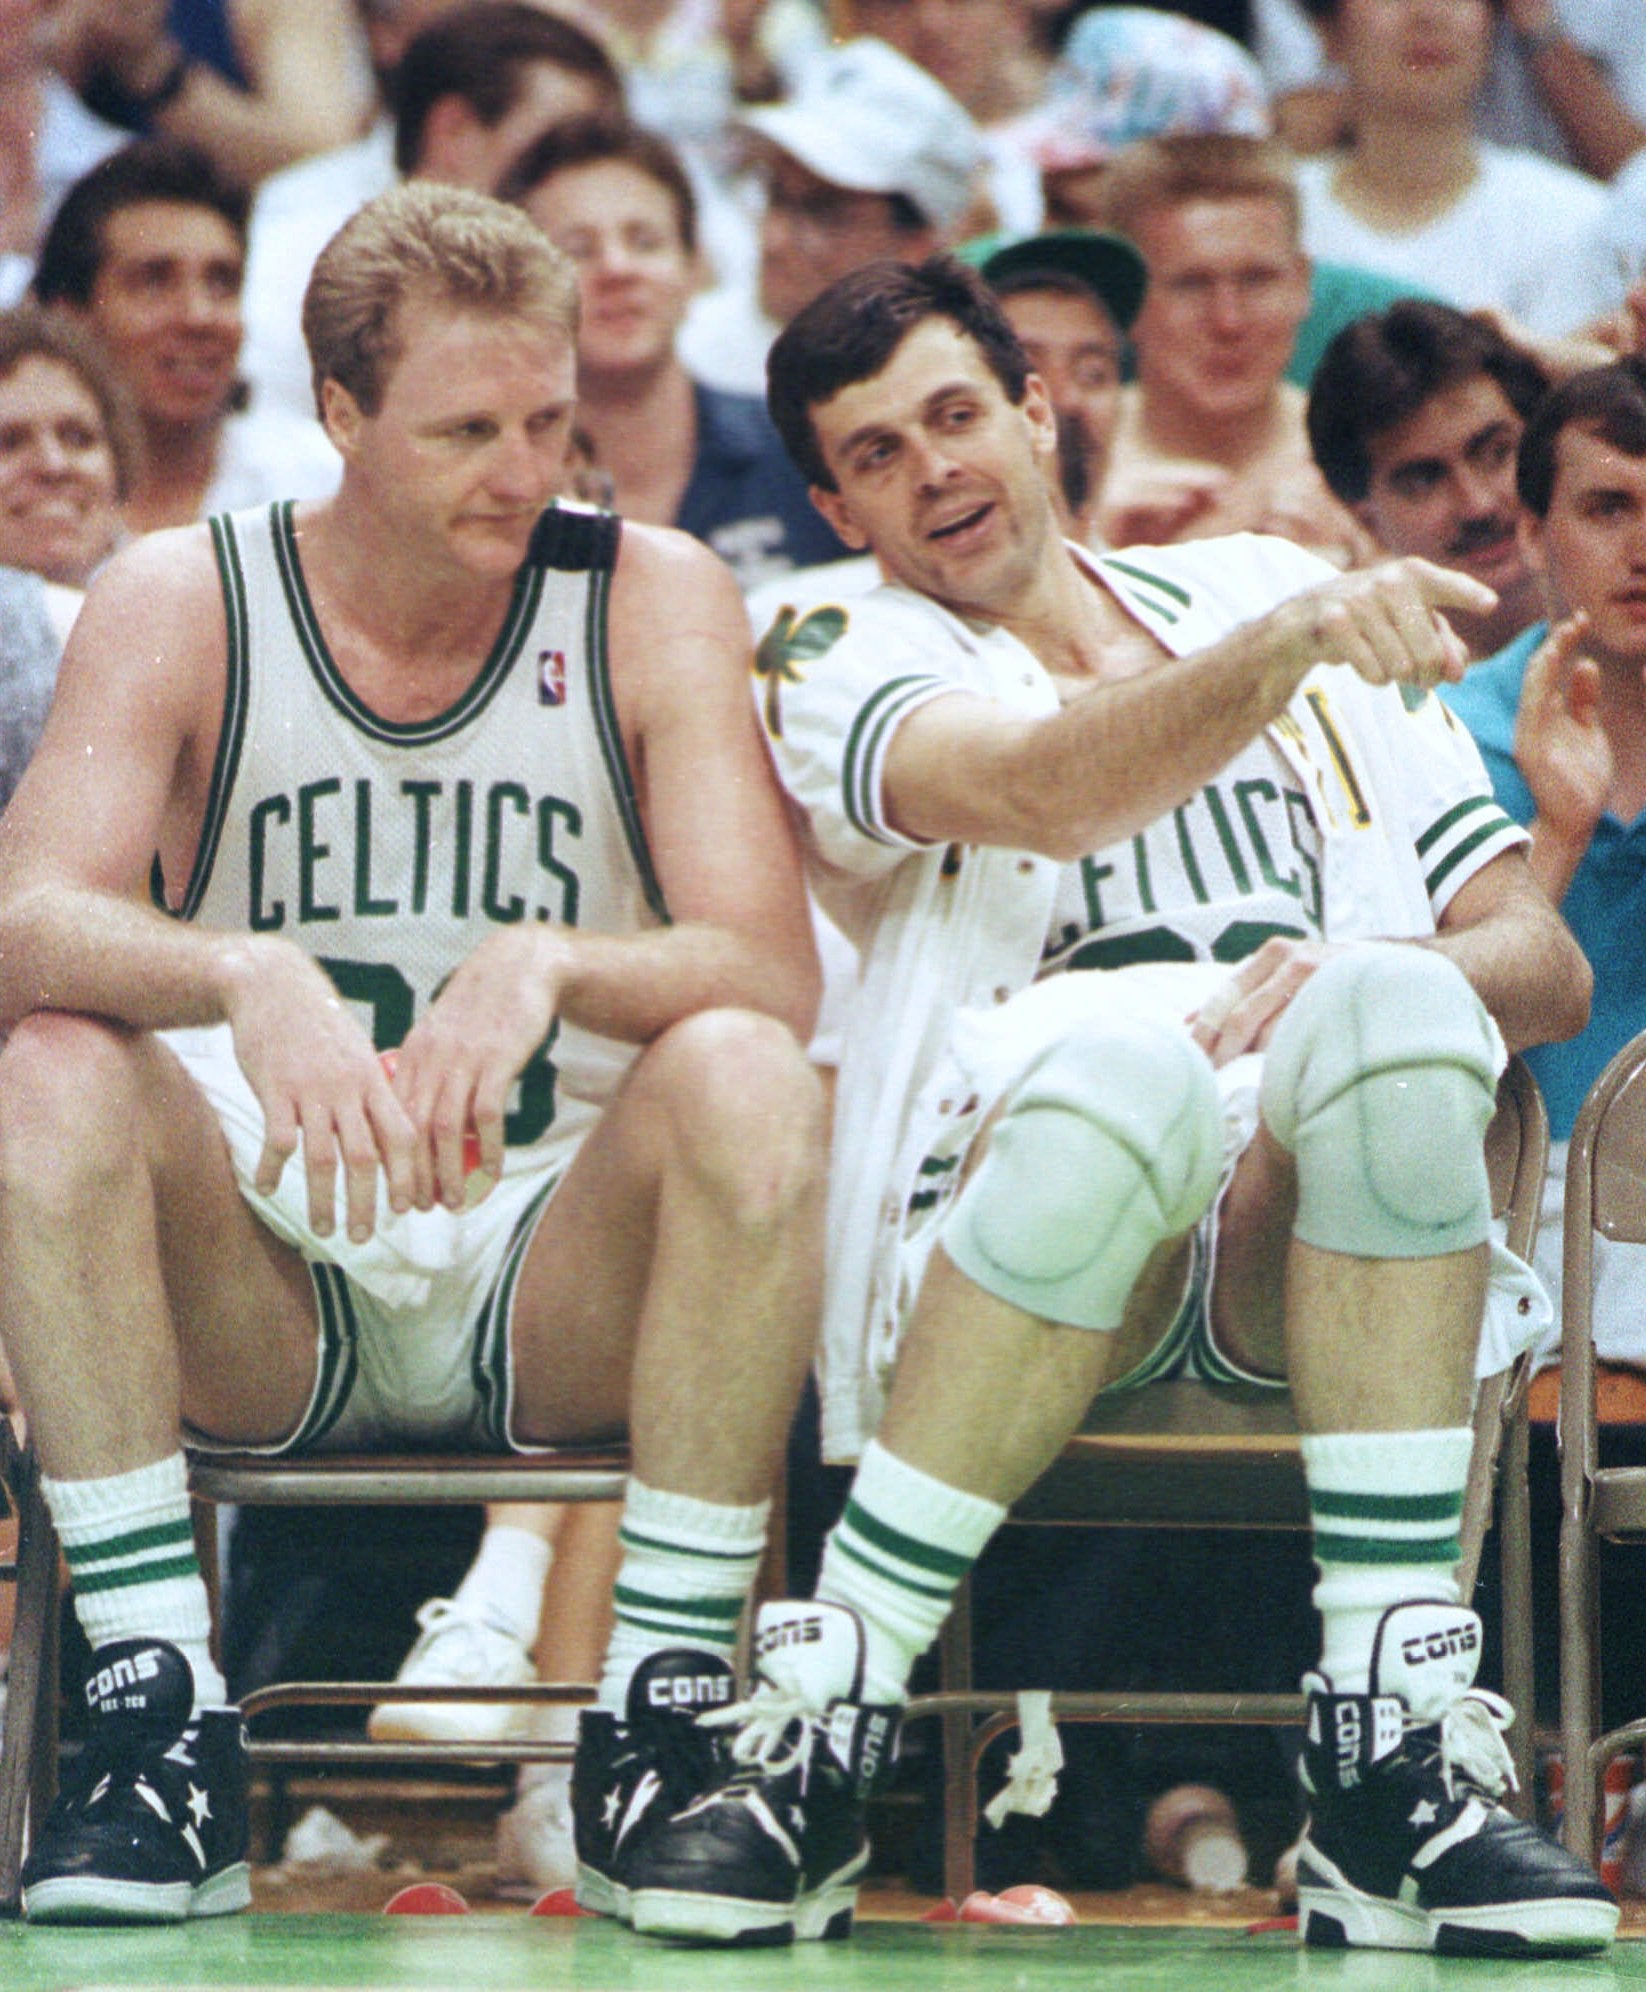 I was thinking about my grandmother - Larry Bird confessed to Kevin McHale  that his mind was somewhere else during great games, Basketball Network